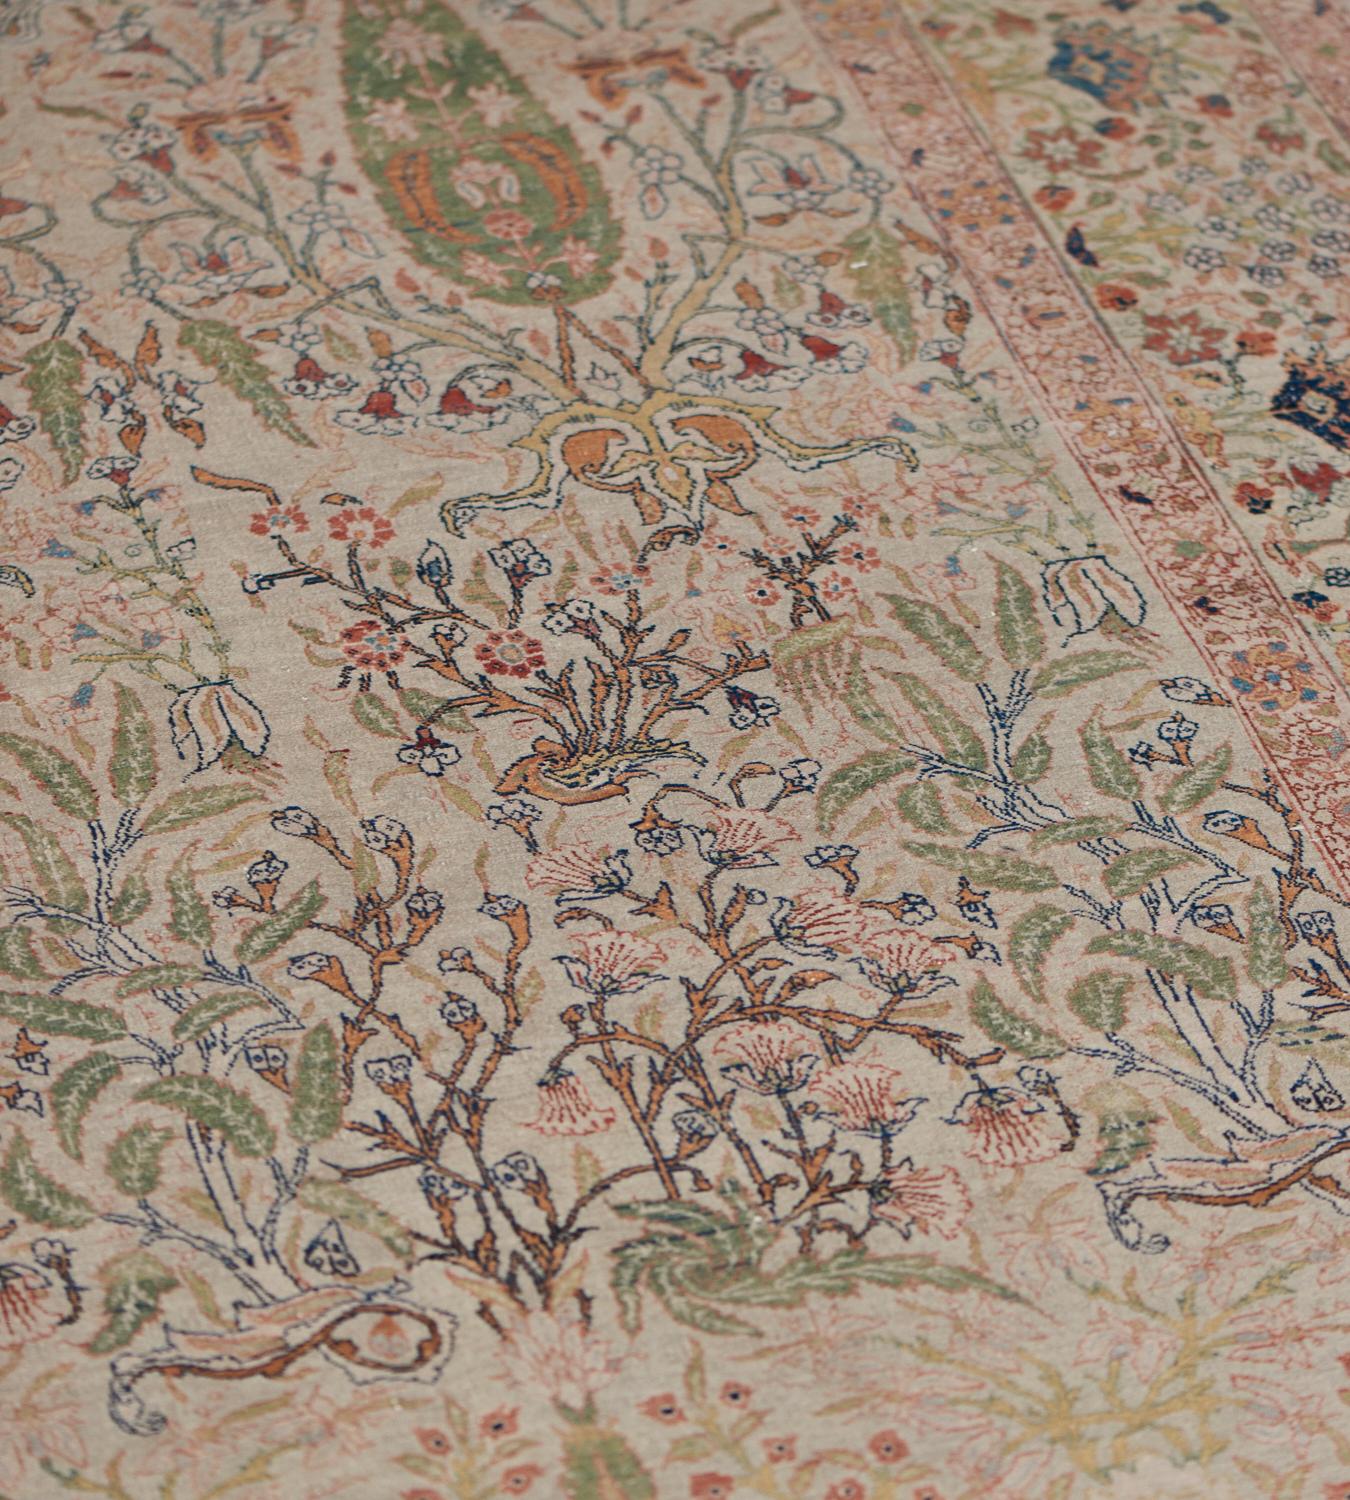 This antique Hadji Jallili rug has a central field with rows of shaded green cypress trees surrounded by bands of delicate floral sprays and linked by further floral and leafy vines, in an ivory border of cypress trees alternating with floral and